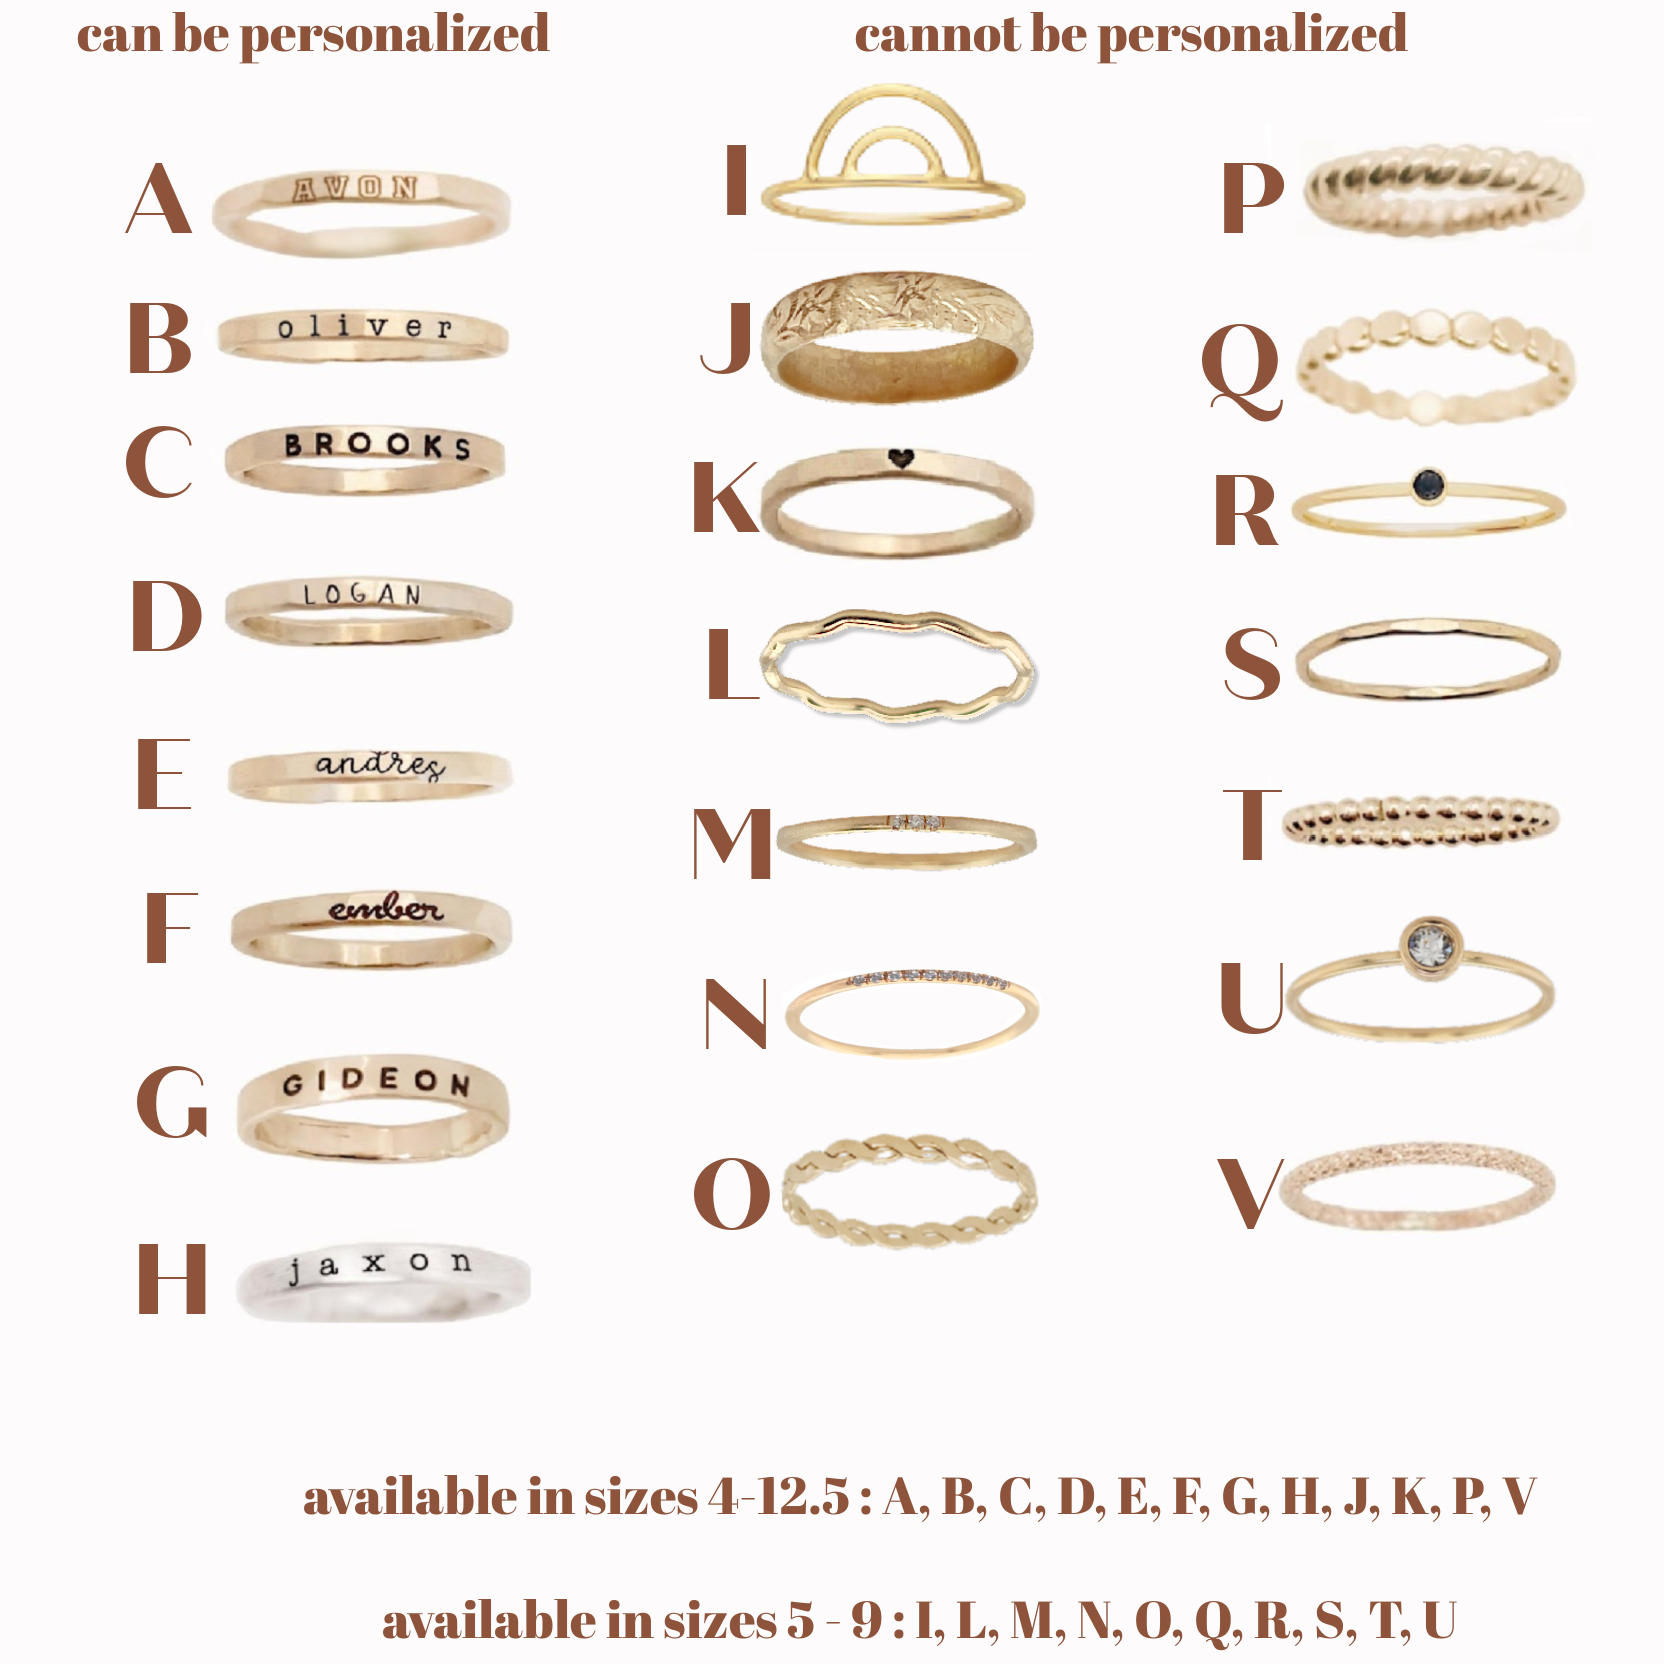 Complete Ring Making Starter Kit ~ Makes Your Own Stylish Rings In Gold Or  Silver + FREE Ring Sizer & Free Gift Box ~ A Perfect Gift Or Treat For A  Creative Person